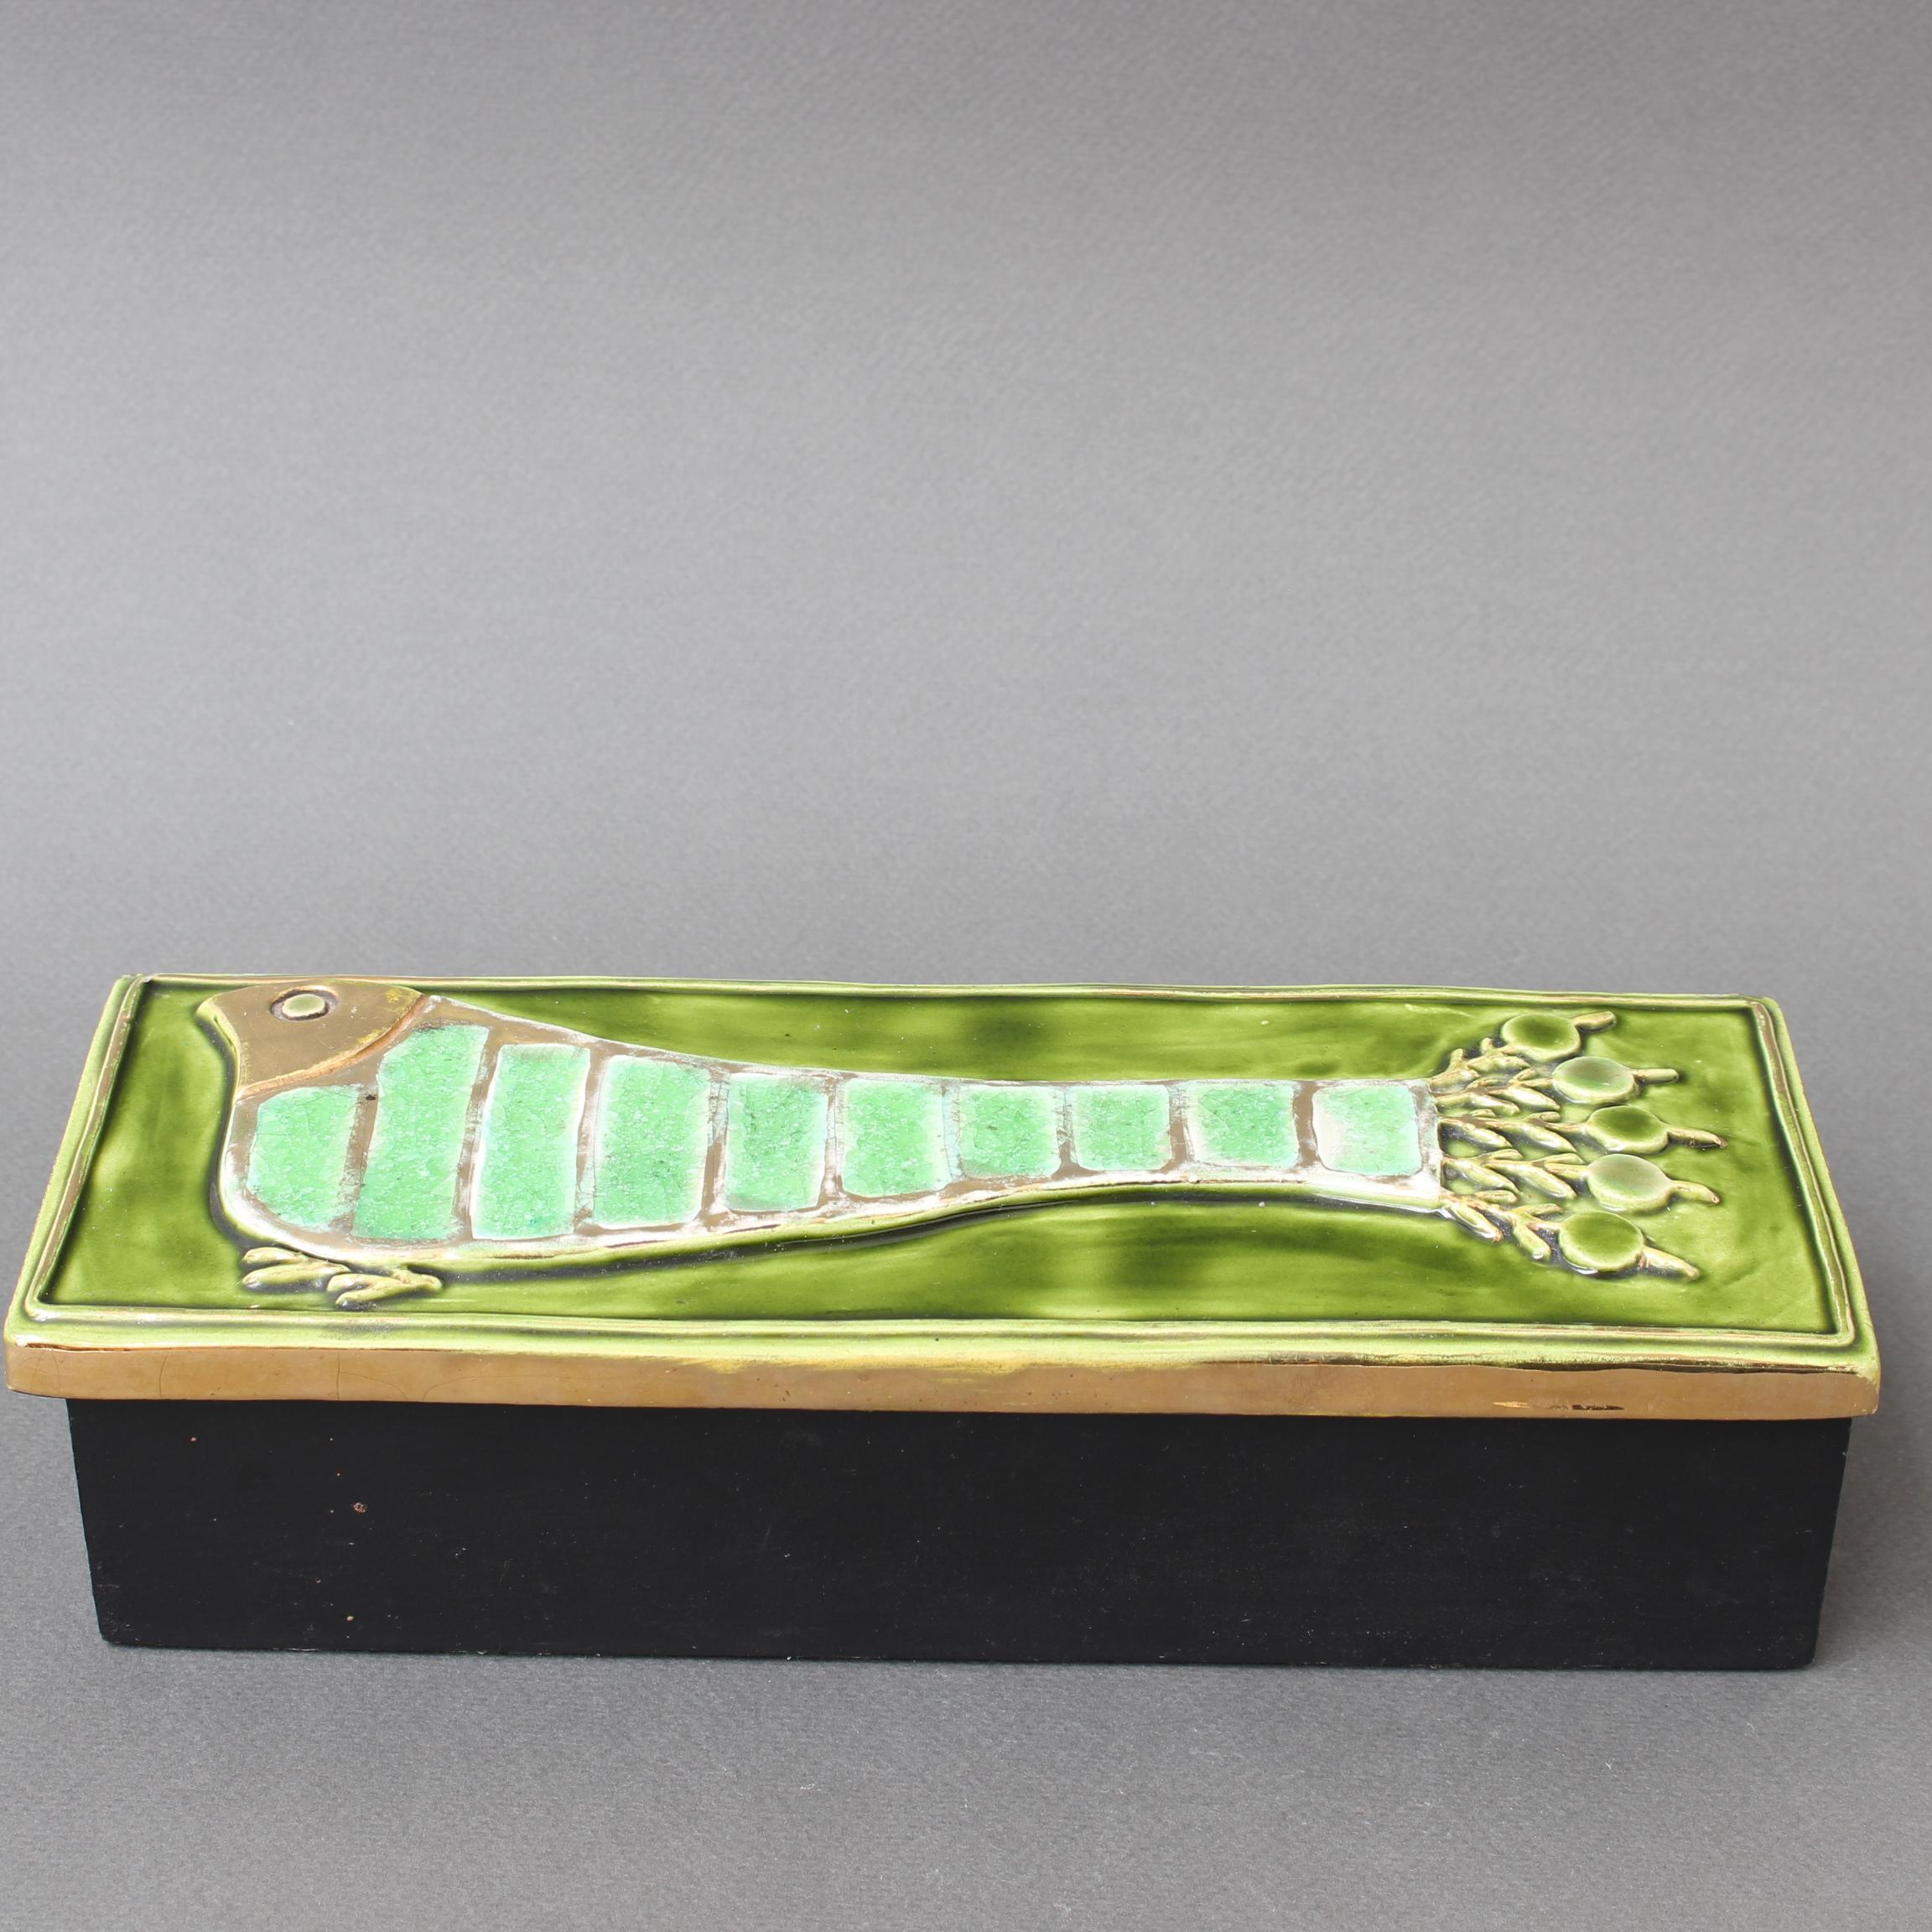 Vintage French jewellery box with decorative ceramic lid by Mithé Espelt (circa 1960s). Raised, stylised bird motif with shades of green both painted and enamelled on the lid, framed and complimented by her trademark gold crackle. The lid tops a